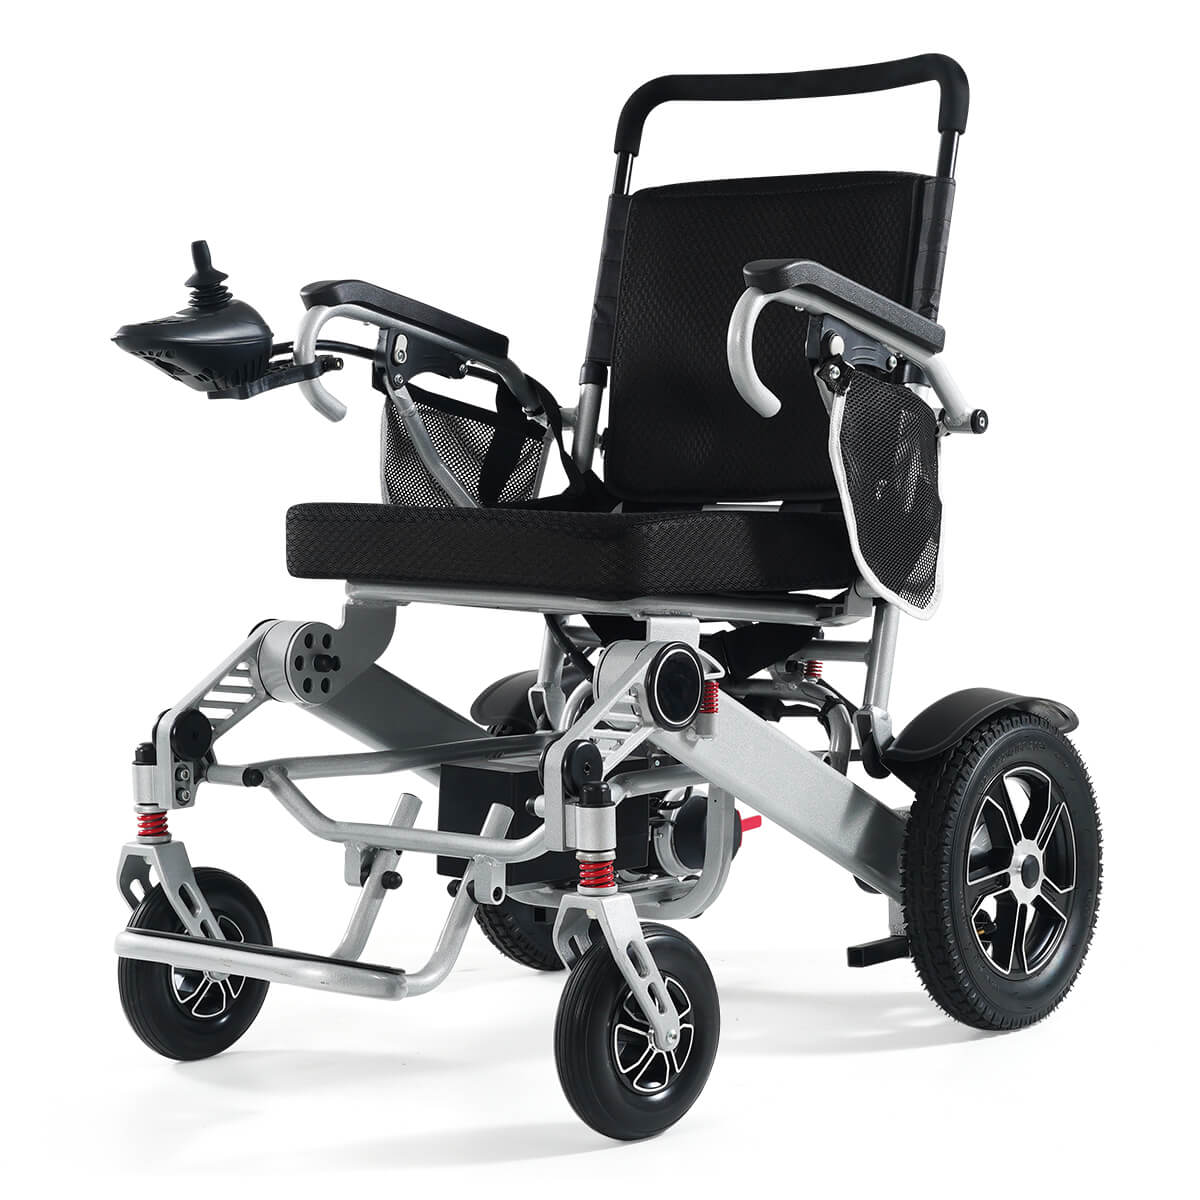 Portable Travel Power Wheelchair - Airline Approved